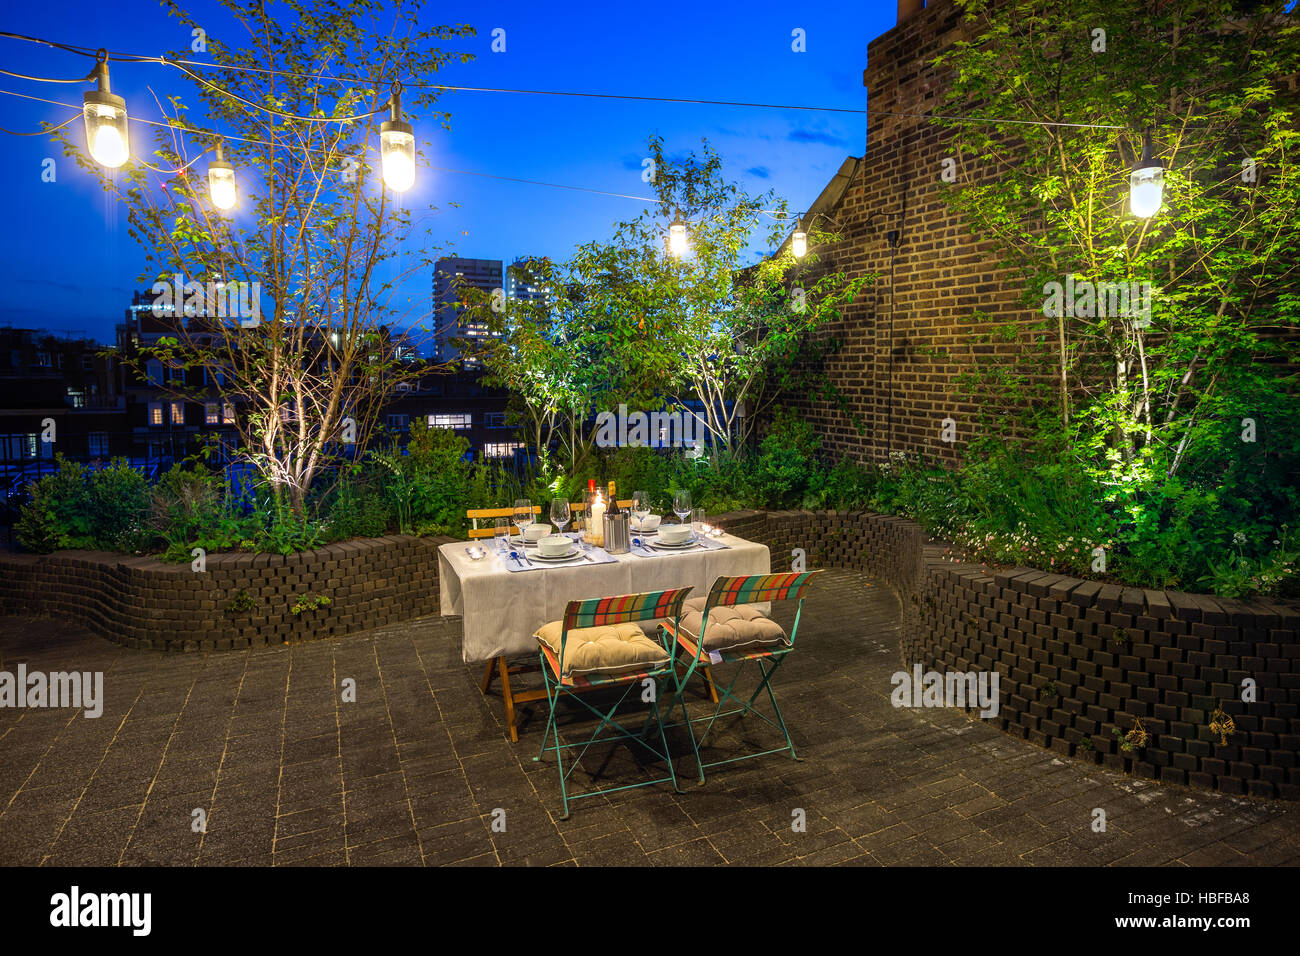 Roof terrace design with traditional brick pavers surfacem, raised beds, lush planting and beautiful garden lighting Stock Photo